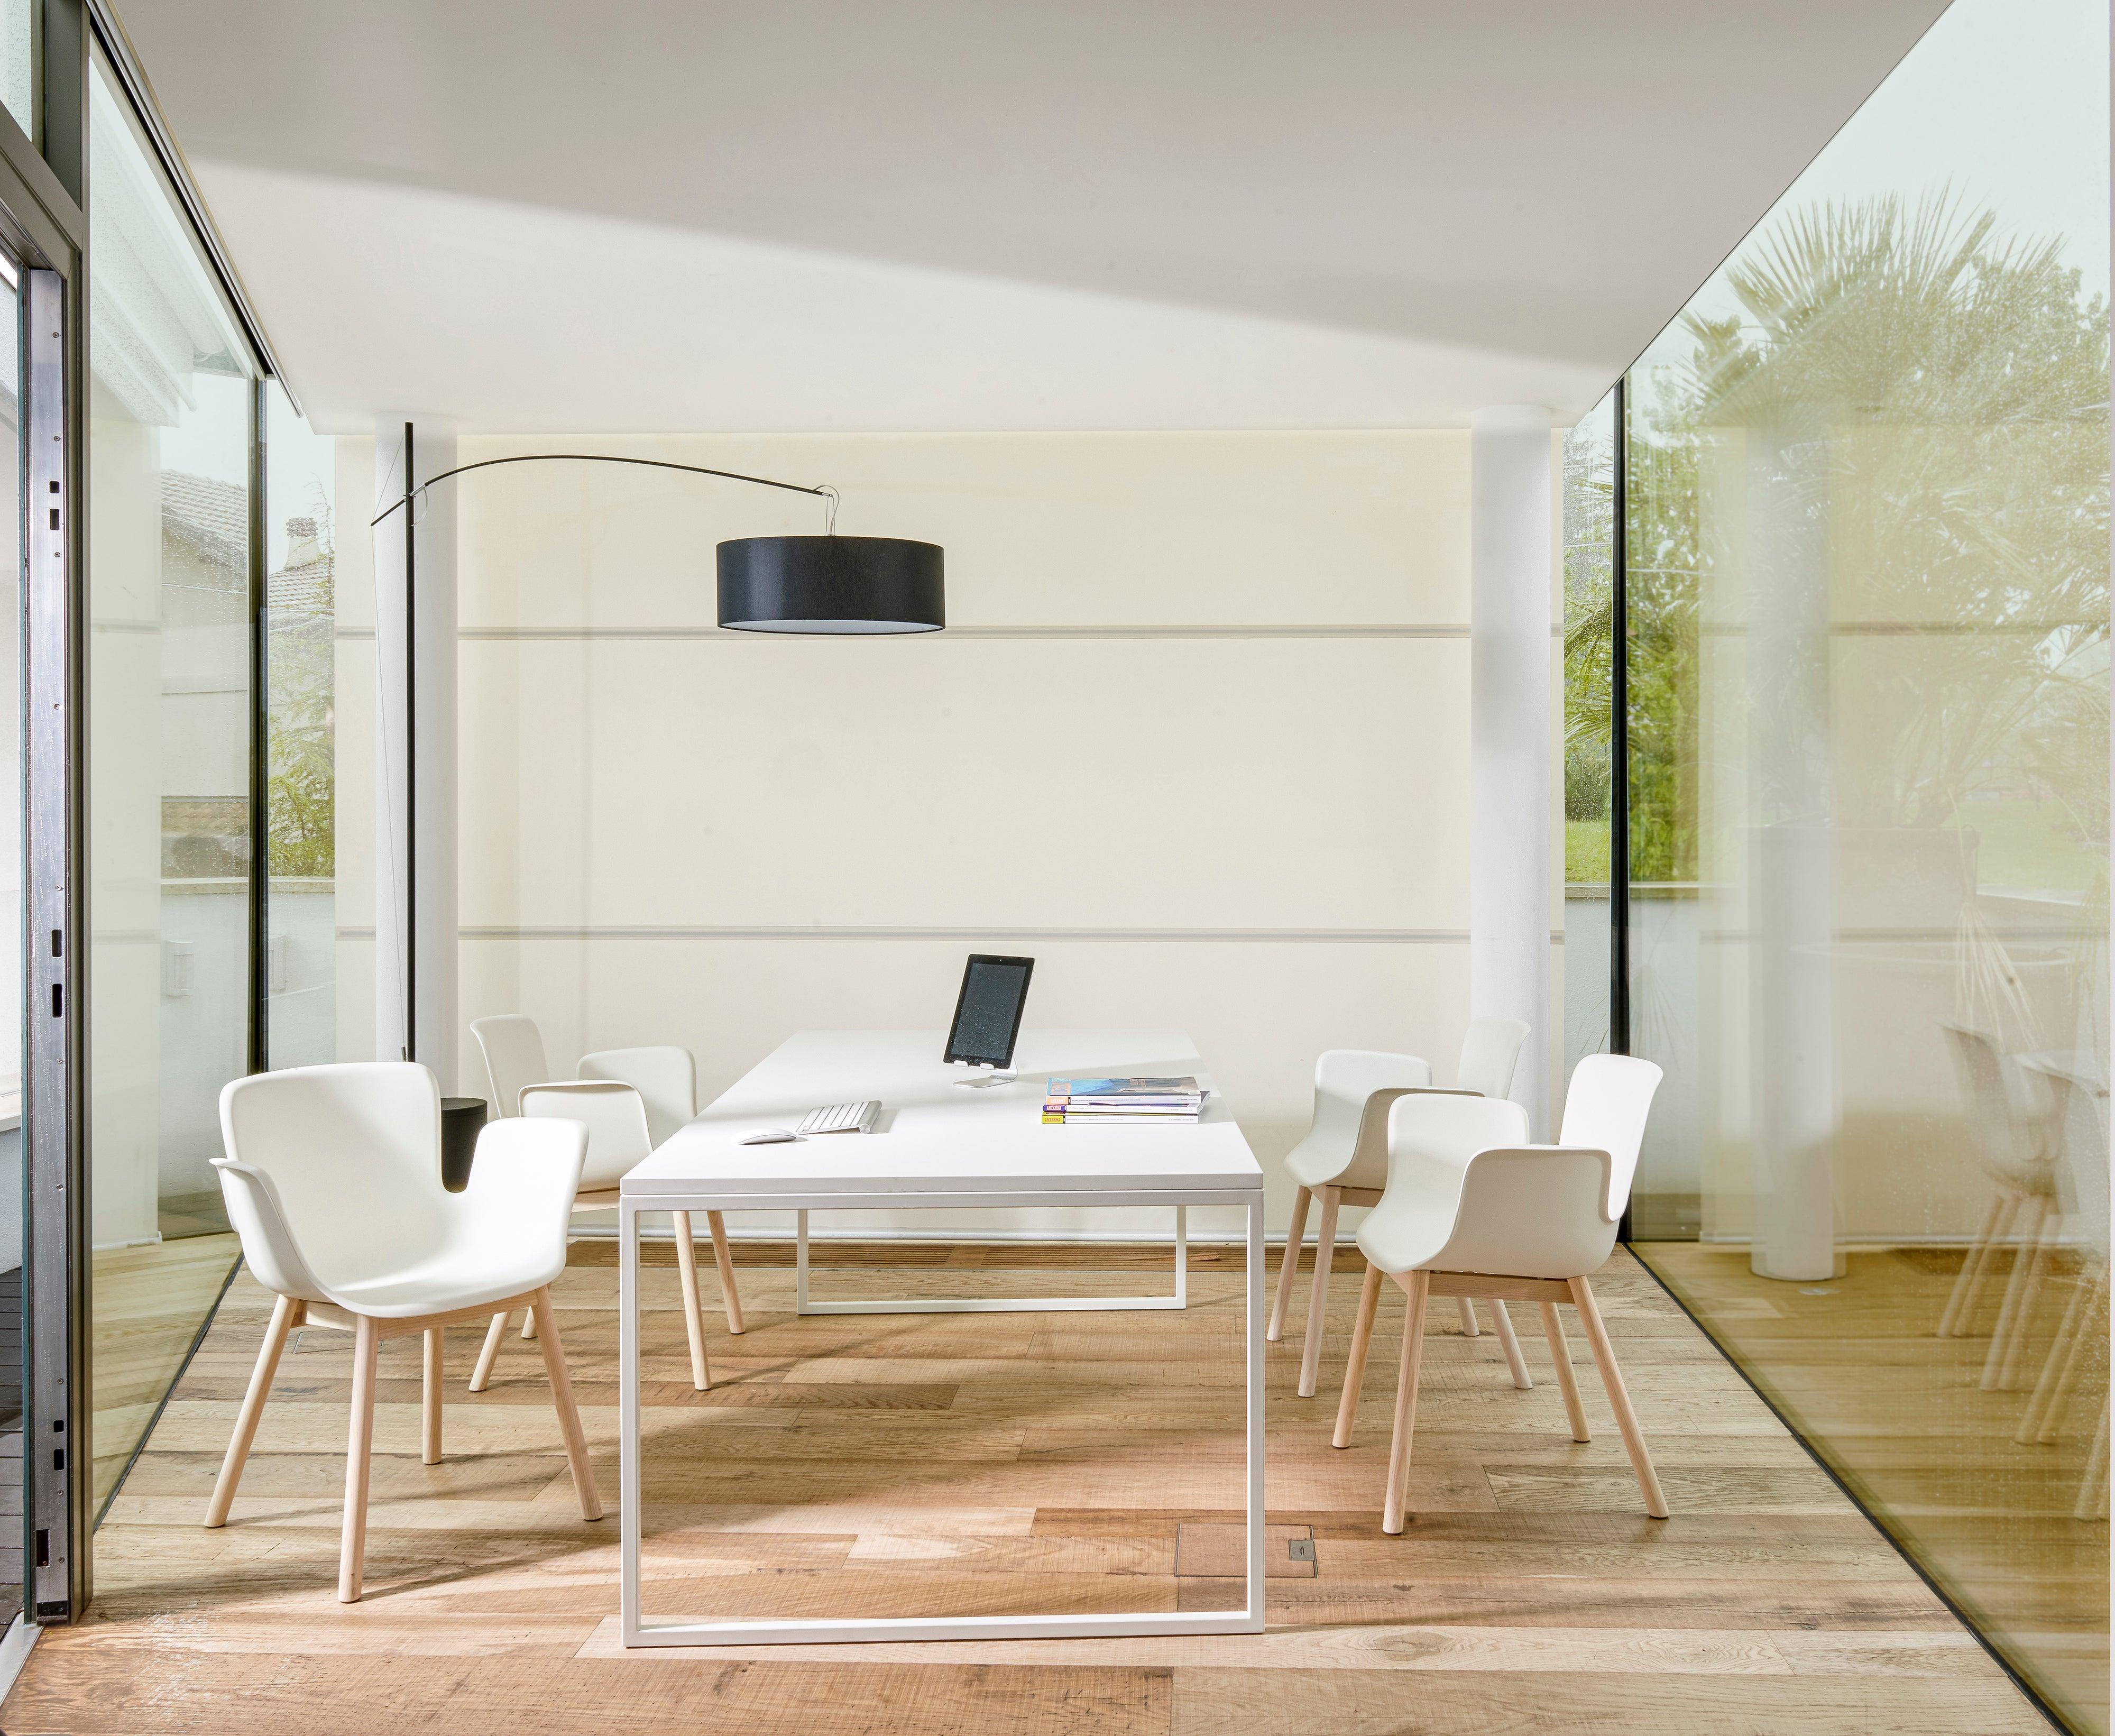 An ode to clean lines, the Fronzoni 64 table embellishes settings with its absolute rigour and essential elegance. Austere and perfectly functional, the Fronzoni 64 tables are the perfect expression of the designer’s vision, whereby geometry